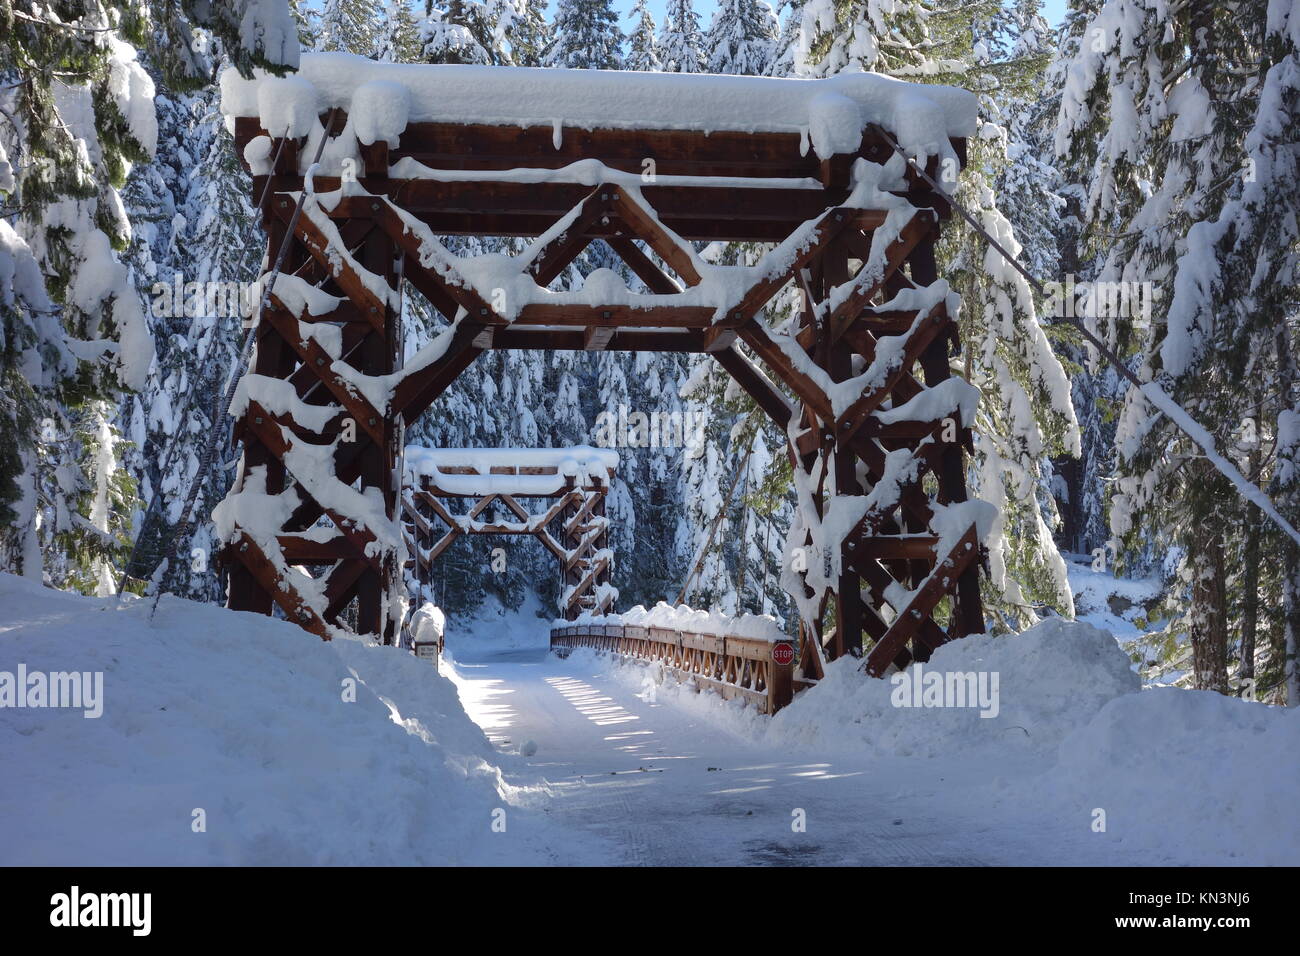 The Longmire Suspension Bridge is covered in snow during winter at the Mount Rainier National Park December 30, 2015 in Longmire, Washington.  (photo by NPS Photo via Planetpix) Stock Photo